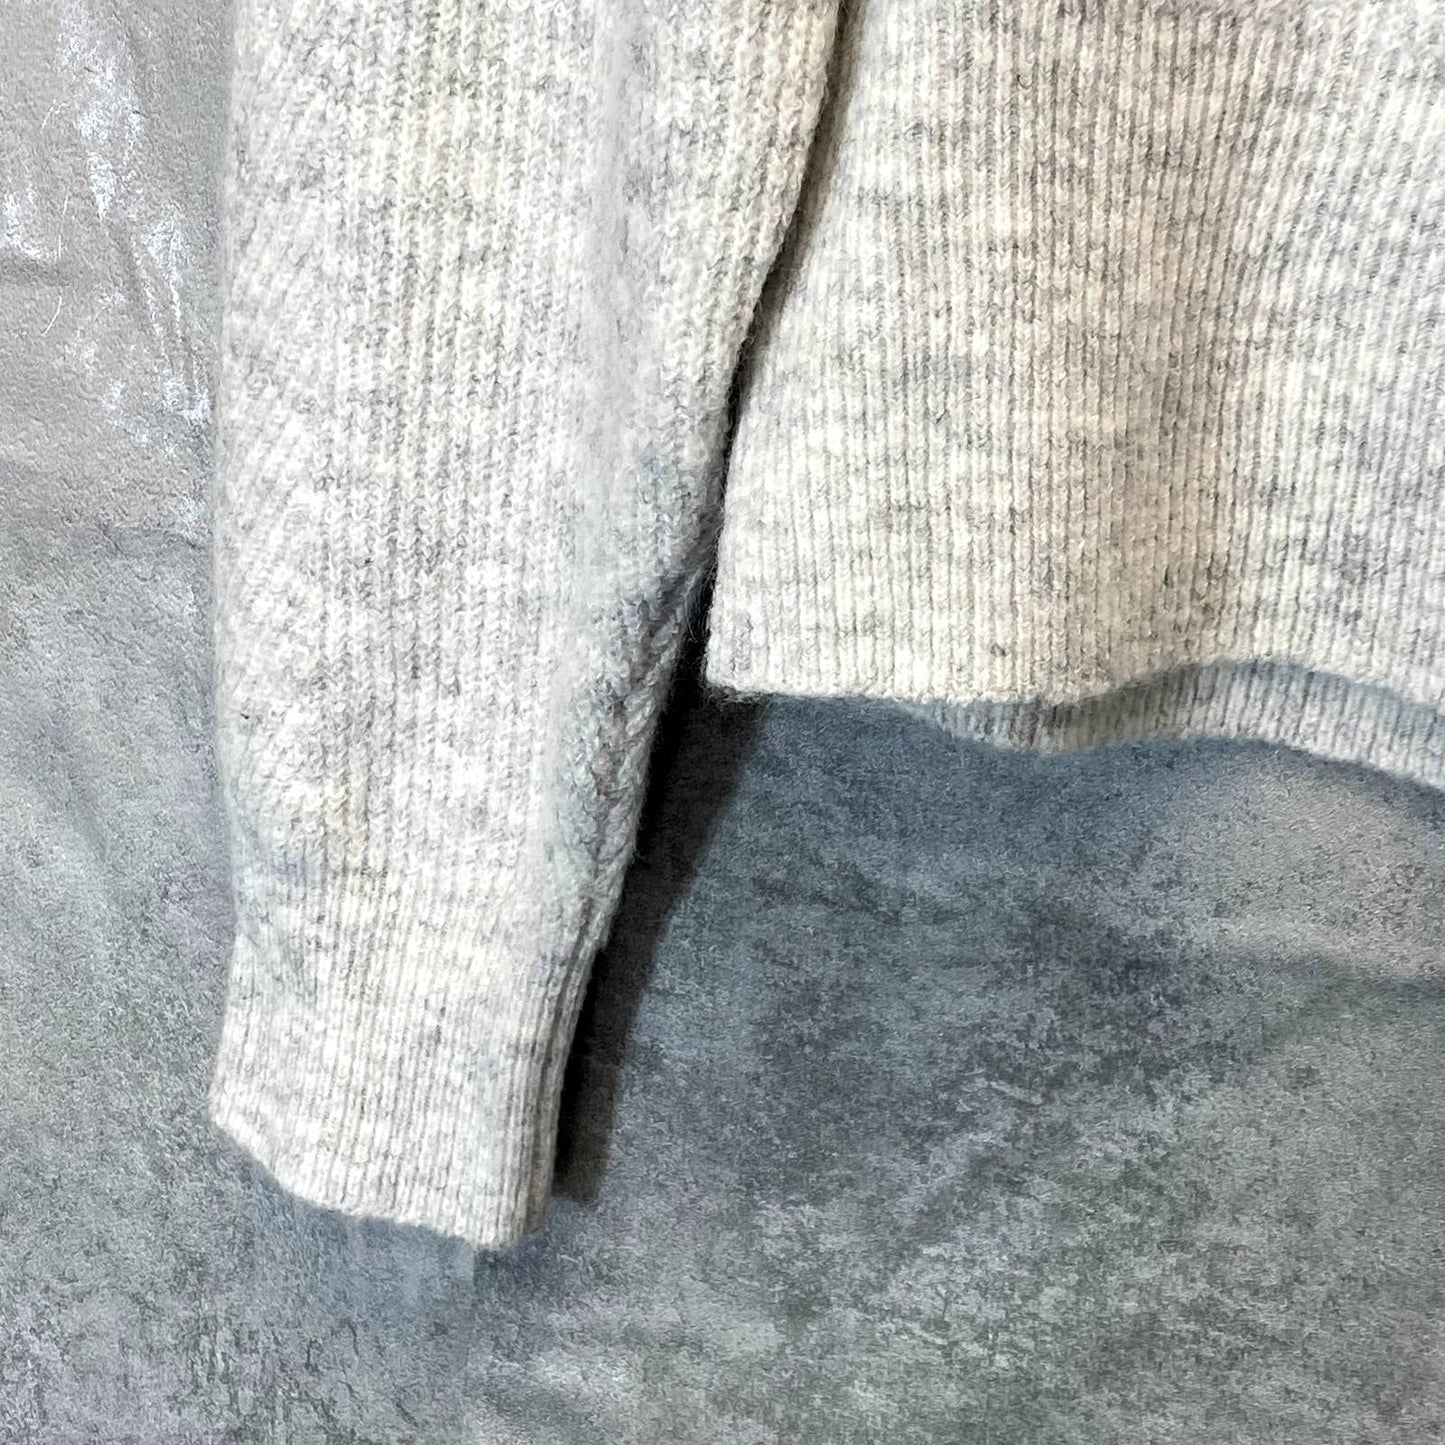 TOPSHOP Women's Gray Boat Neck Long Sleeve Ribbed Knit Pullover Sweater SZ 4-6